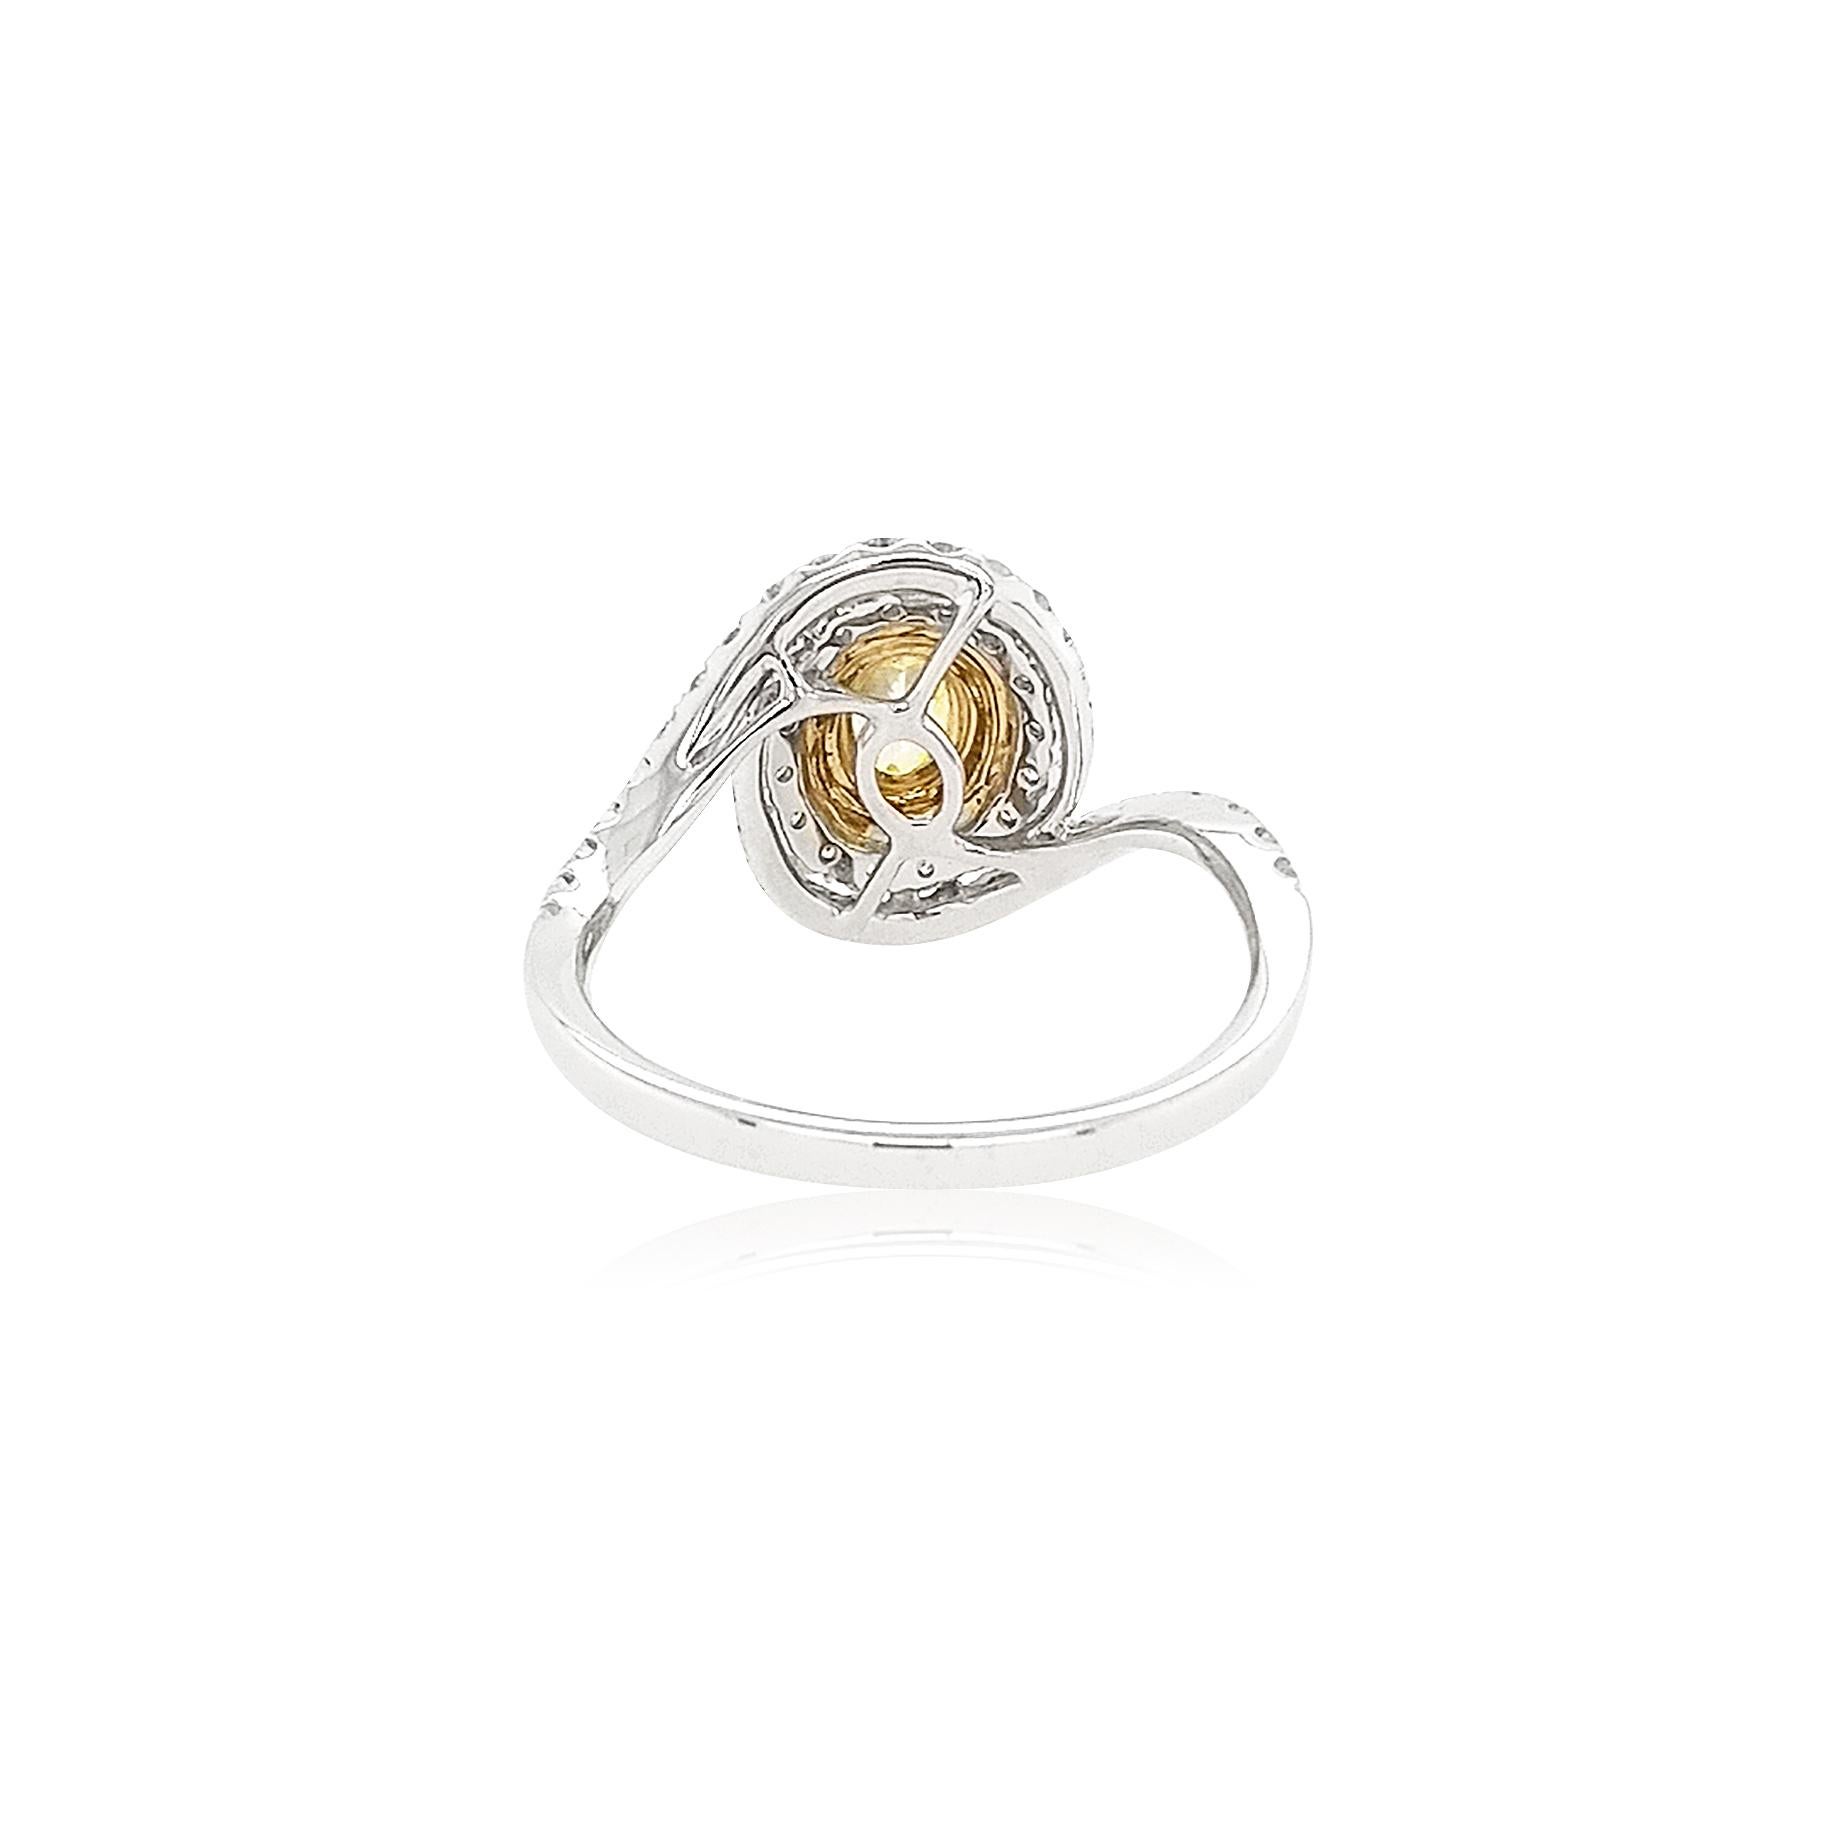 This delicate platinum ring features the lustrous natural Fancy Yellow Diamond at the forefront of its design. The spectacular hues of the Yellow Diamonds are perfectly accentuated by the platinum and 18 Karat yellow gold setting, and elegant